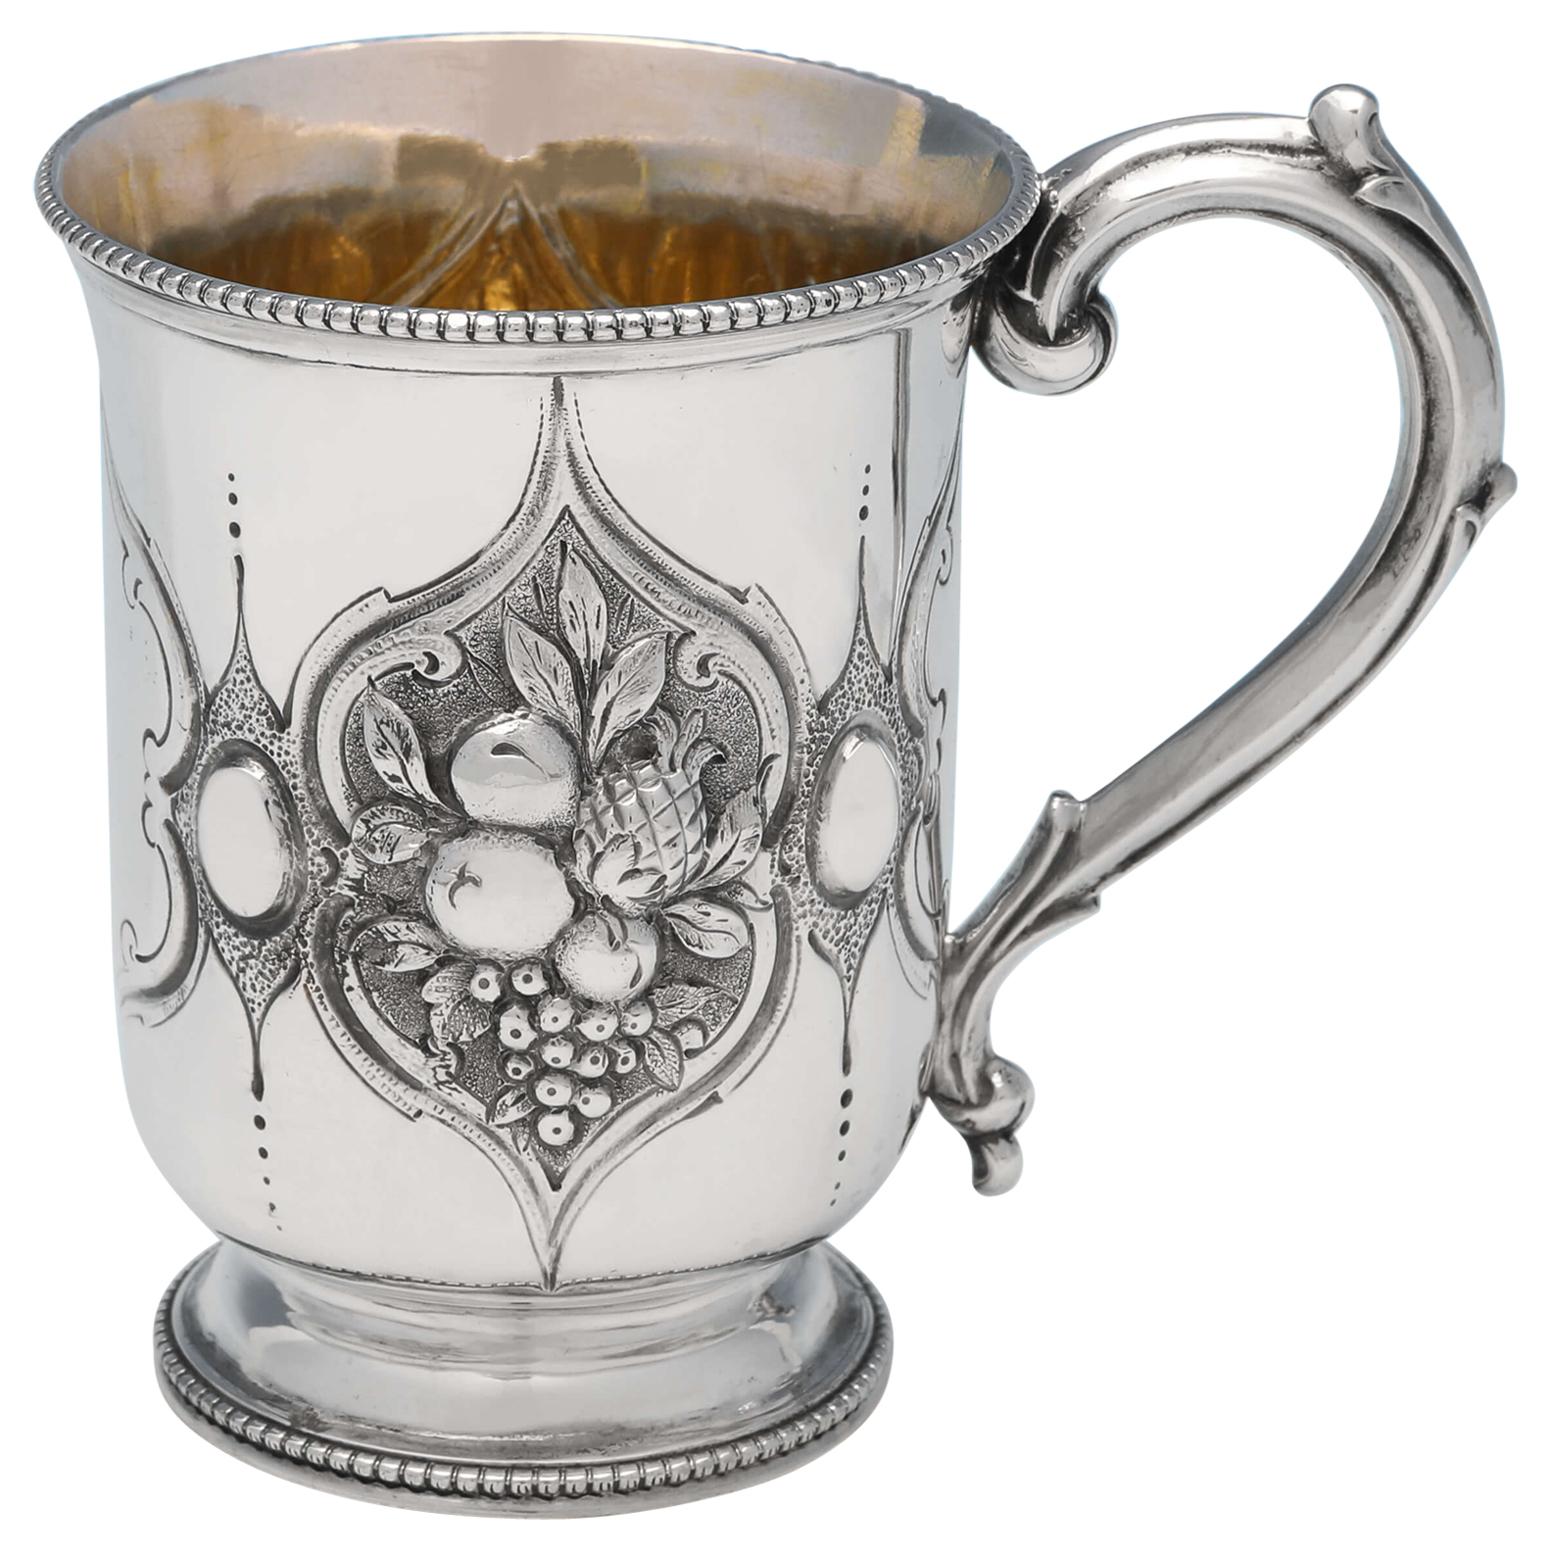 Victorian Chased Sterling Silver Christening Mug by Henry Holland, London, 1866